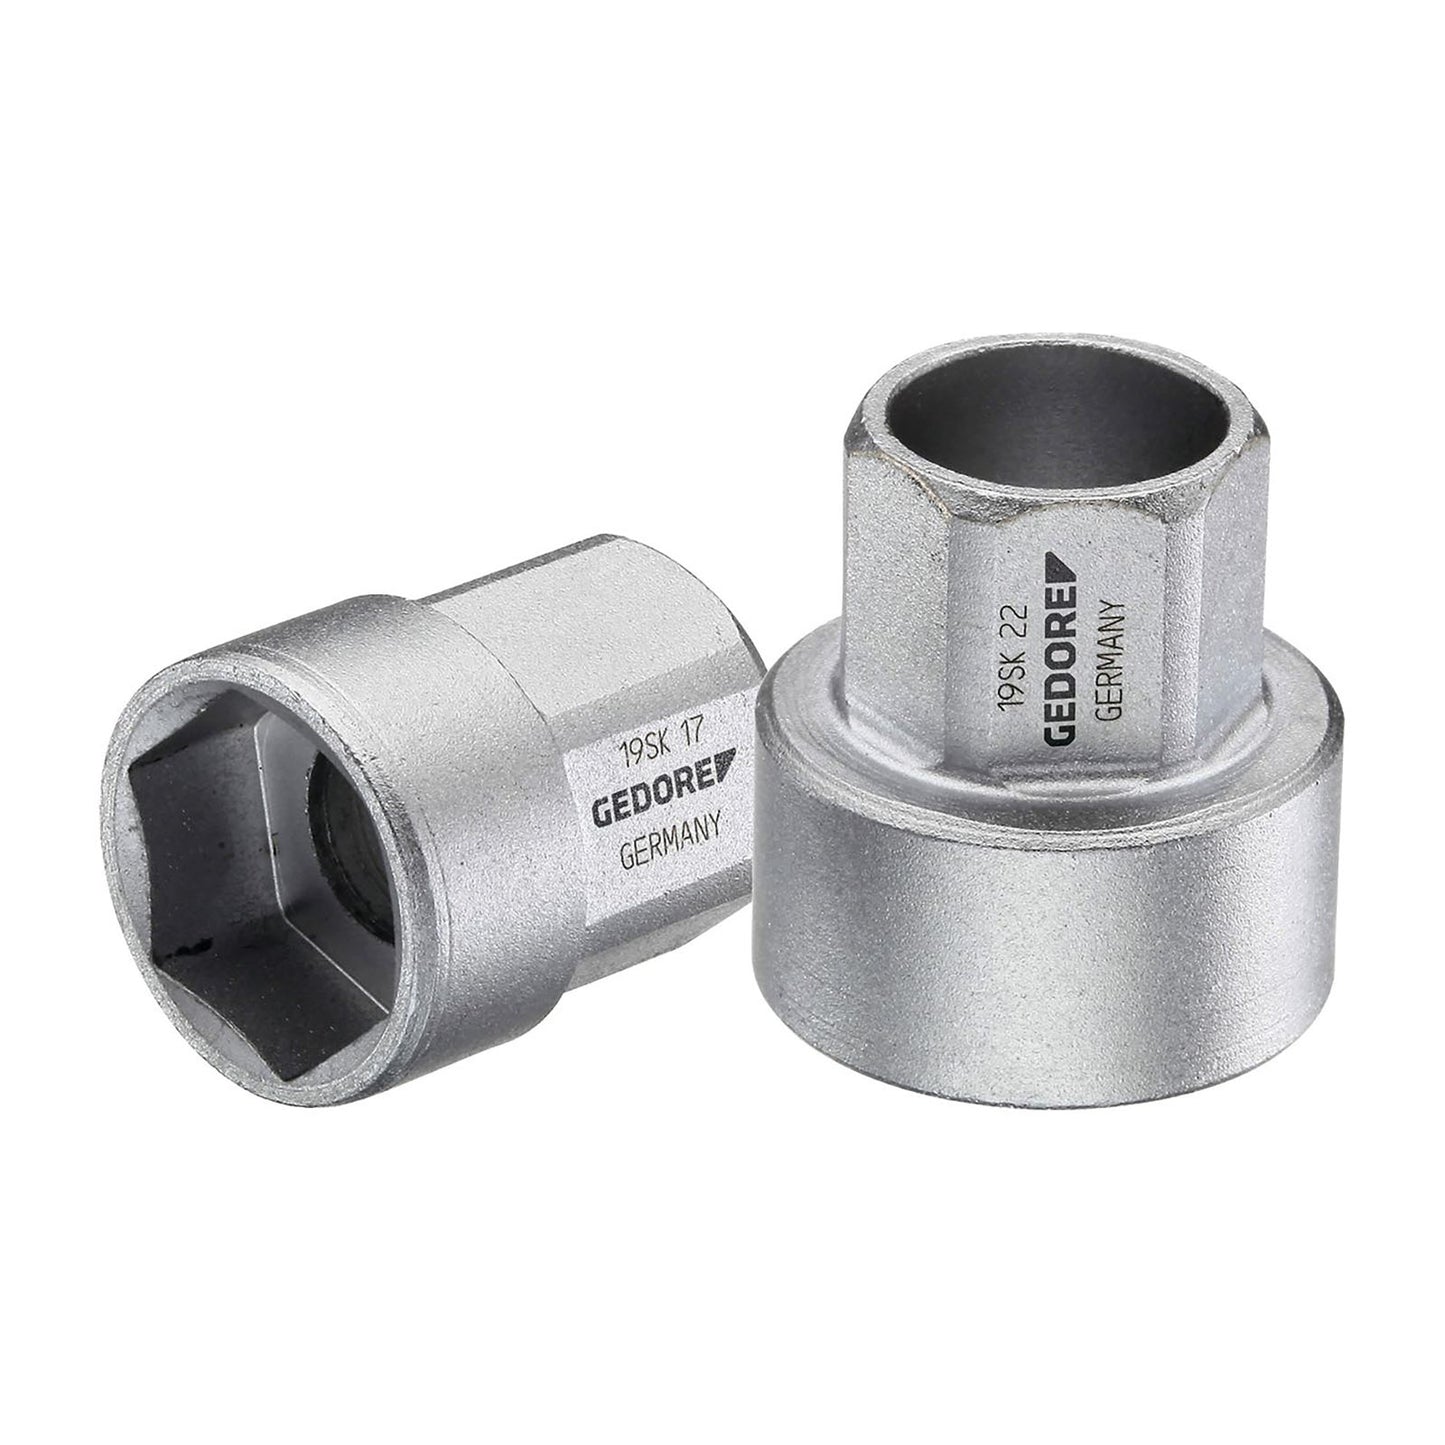 GEDORE 19 SK 22 - Special Hex socket 1/2", 22mm (2225972)